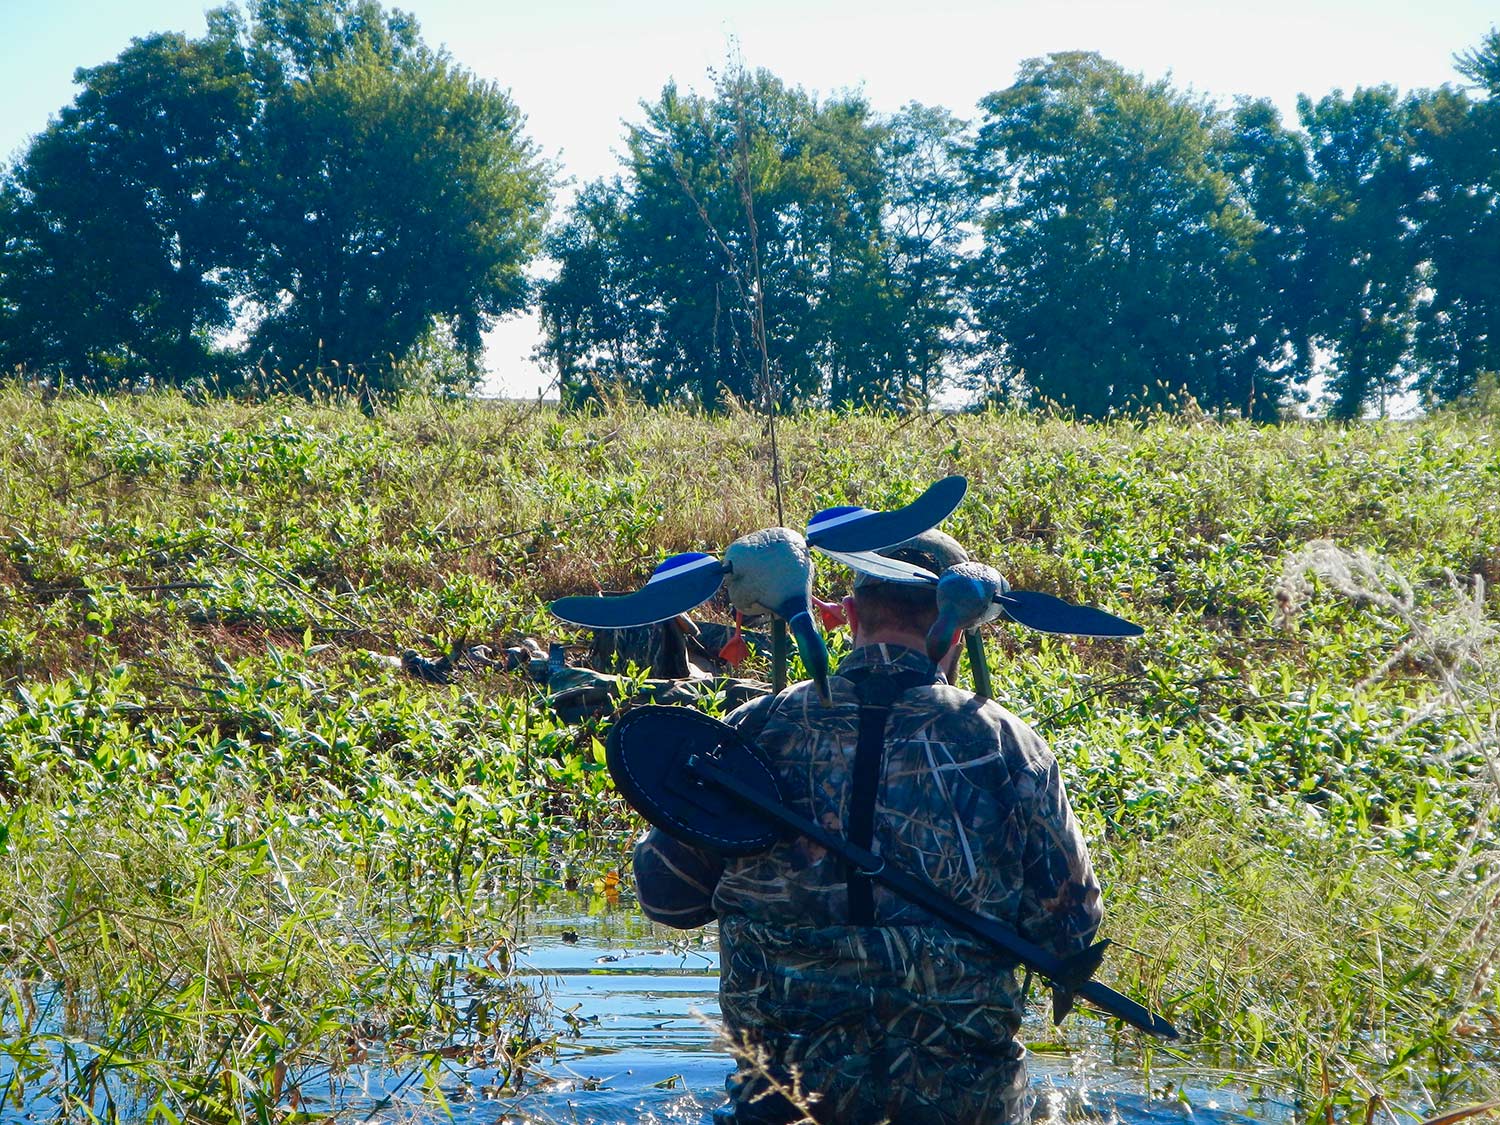 A hunter wading through water to place duck decoys.